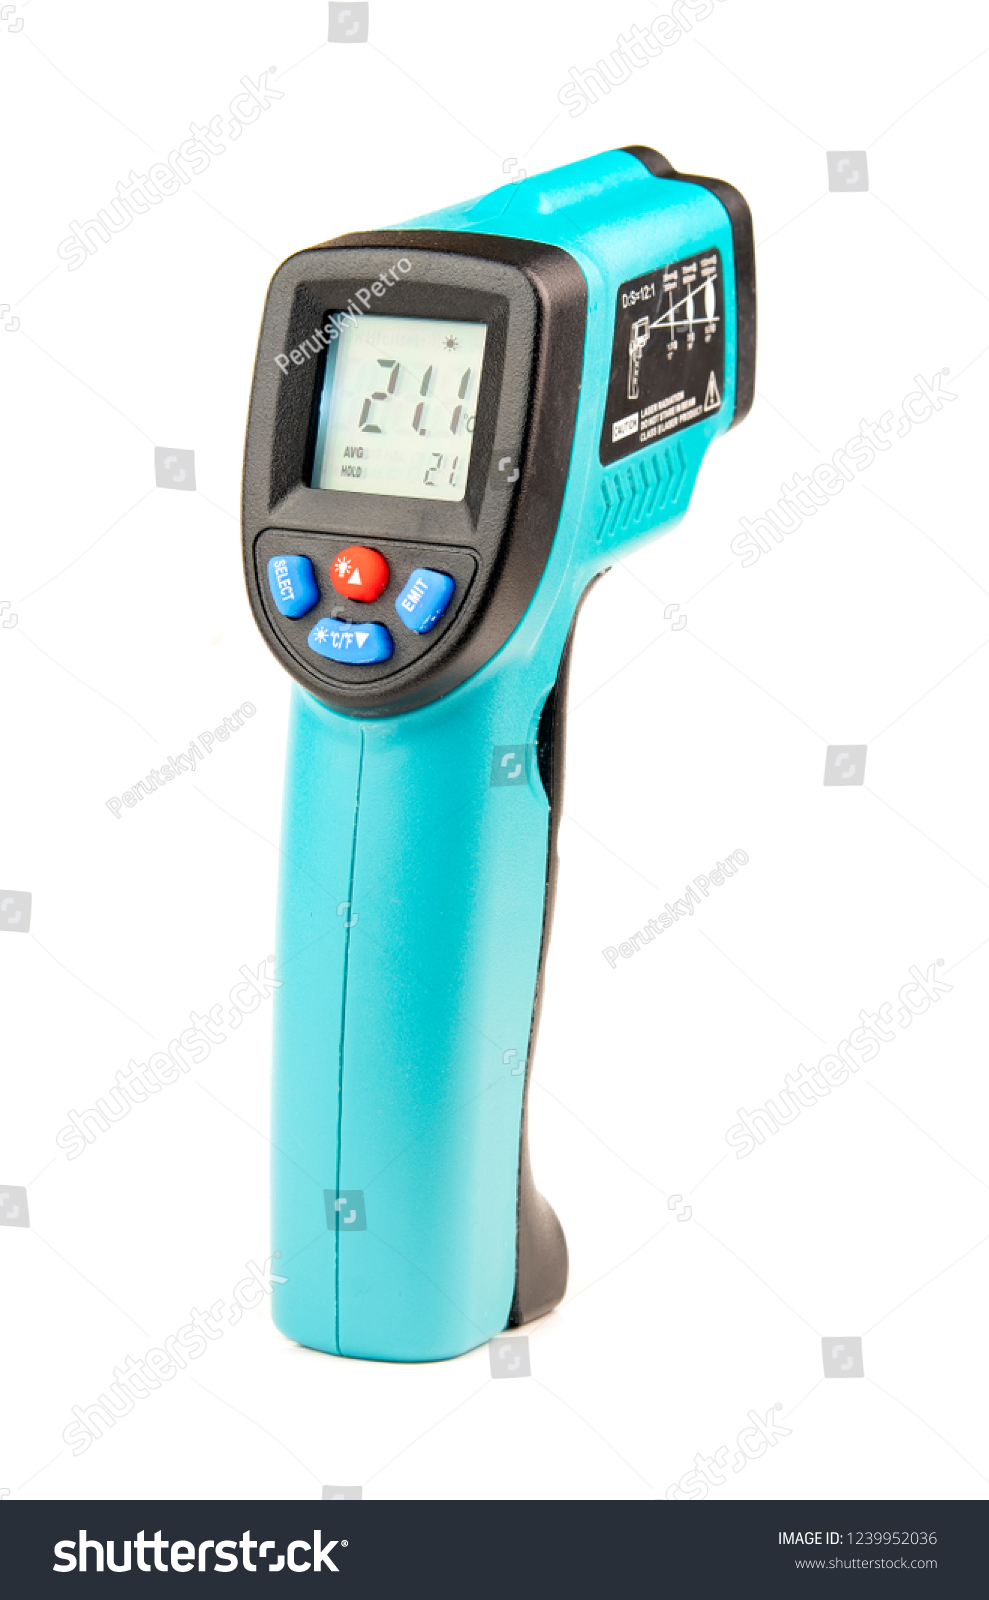 Convenient Digital food thermometer with LCD Display. Isolated on white background #1239952036